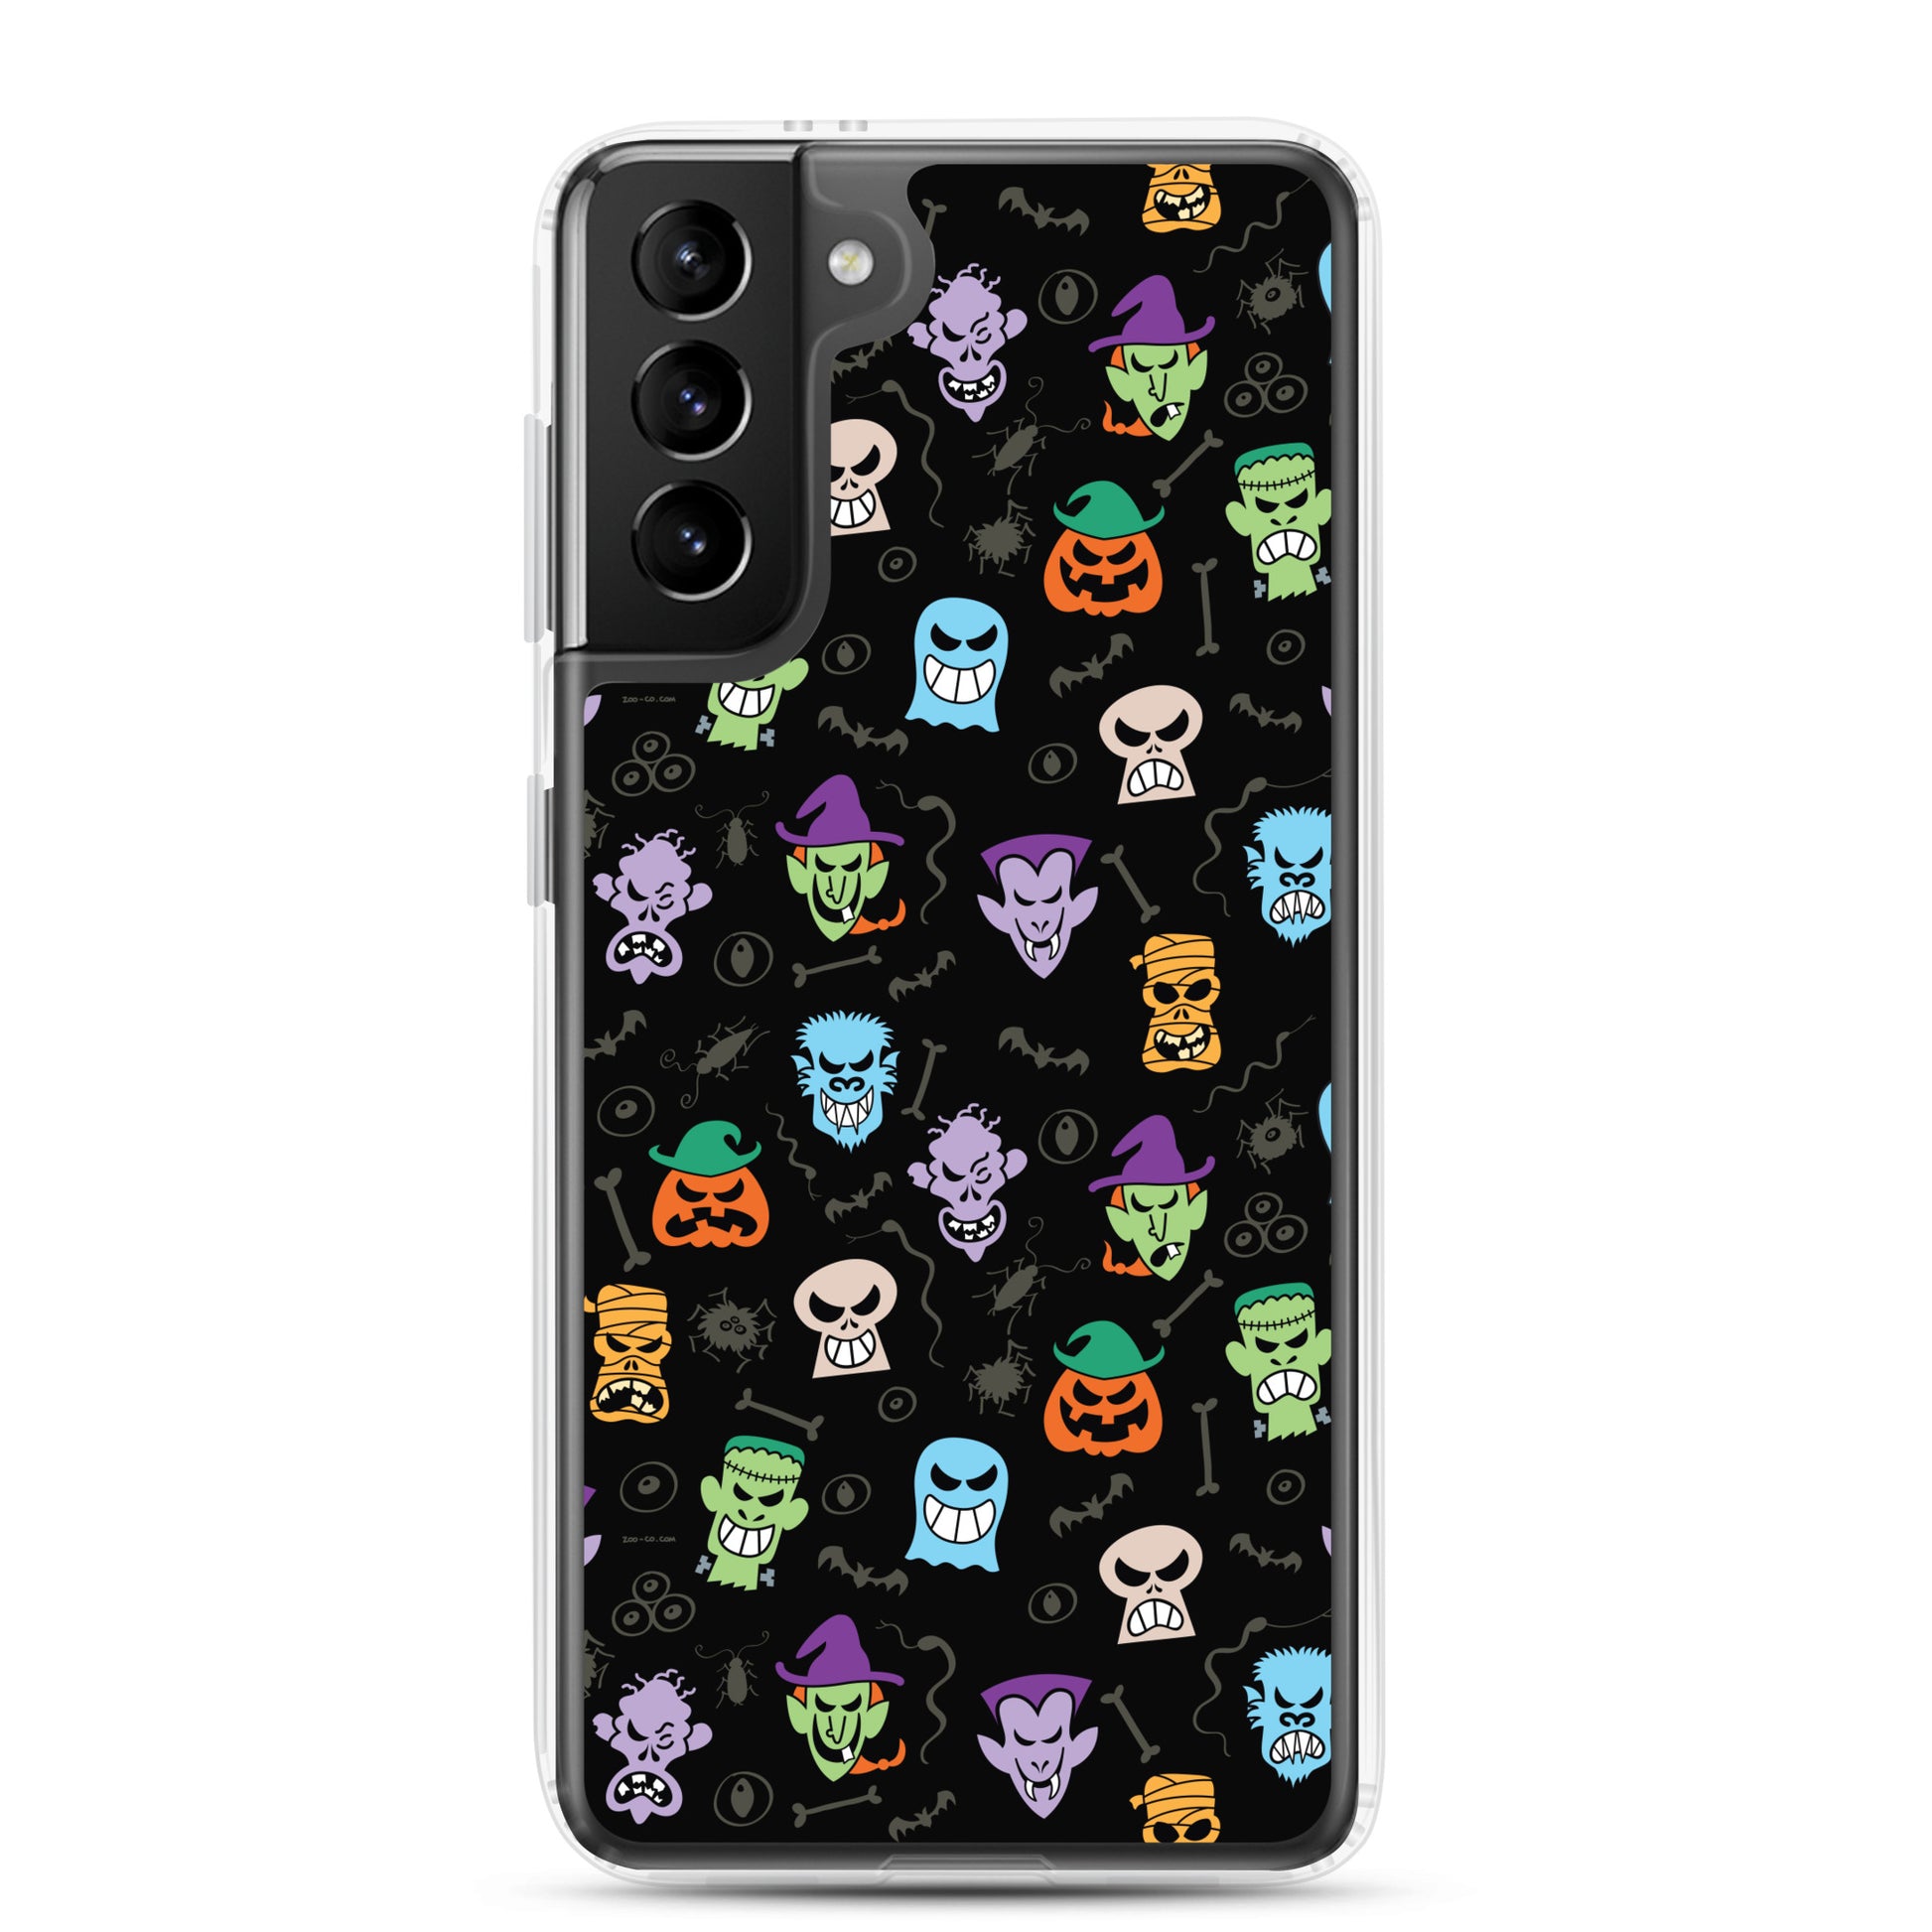 Scary Halloween faces Samsung Case. s21 plus